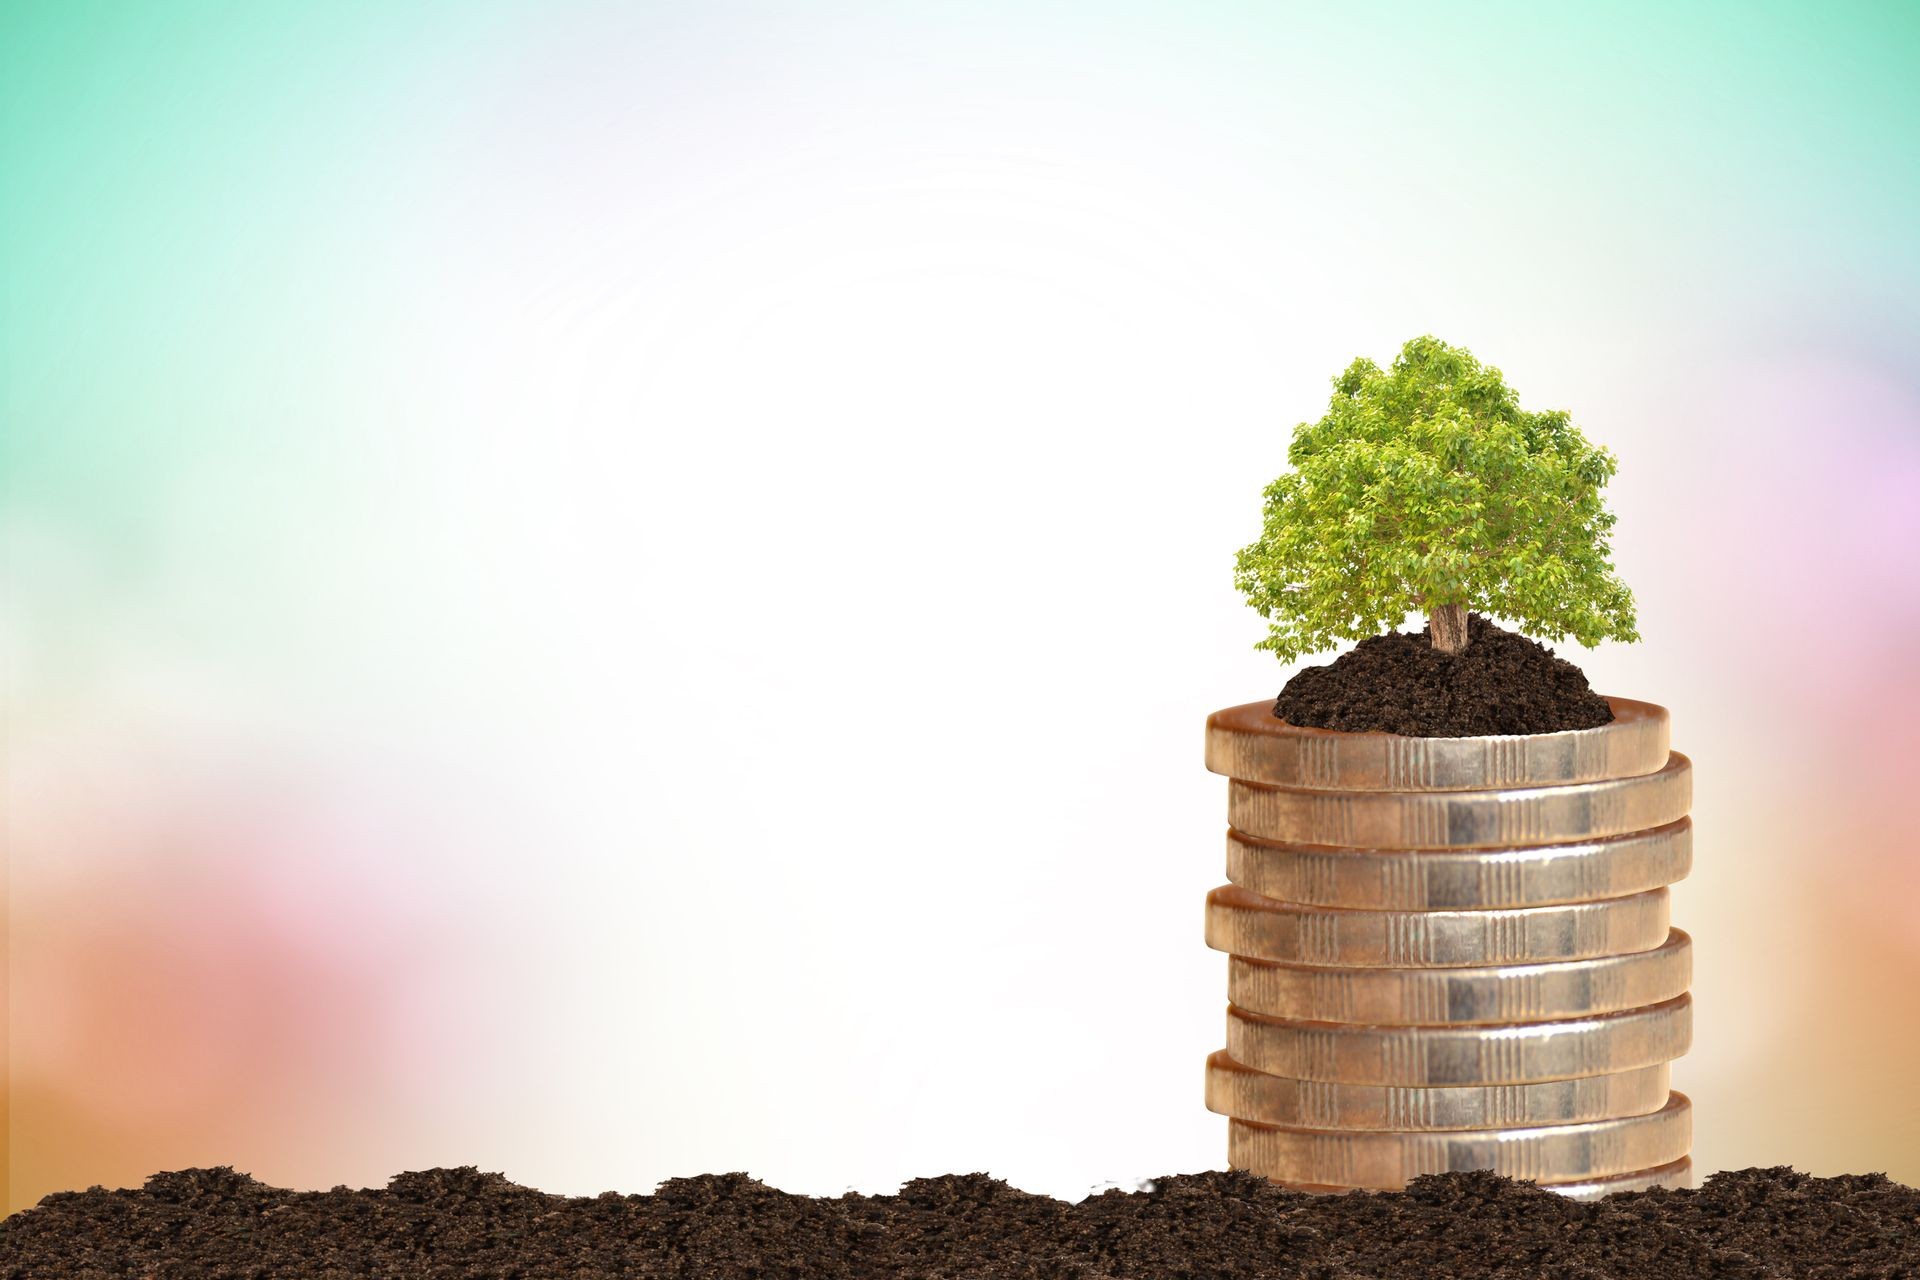 Sustainable finance concepts.tree on a pile of coins is planted in the soil.blur natural background blur